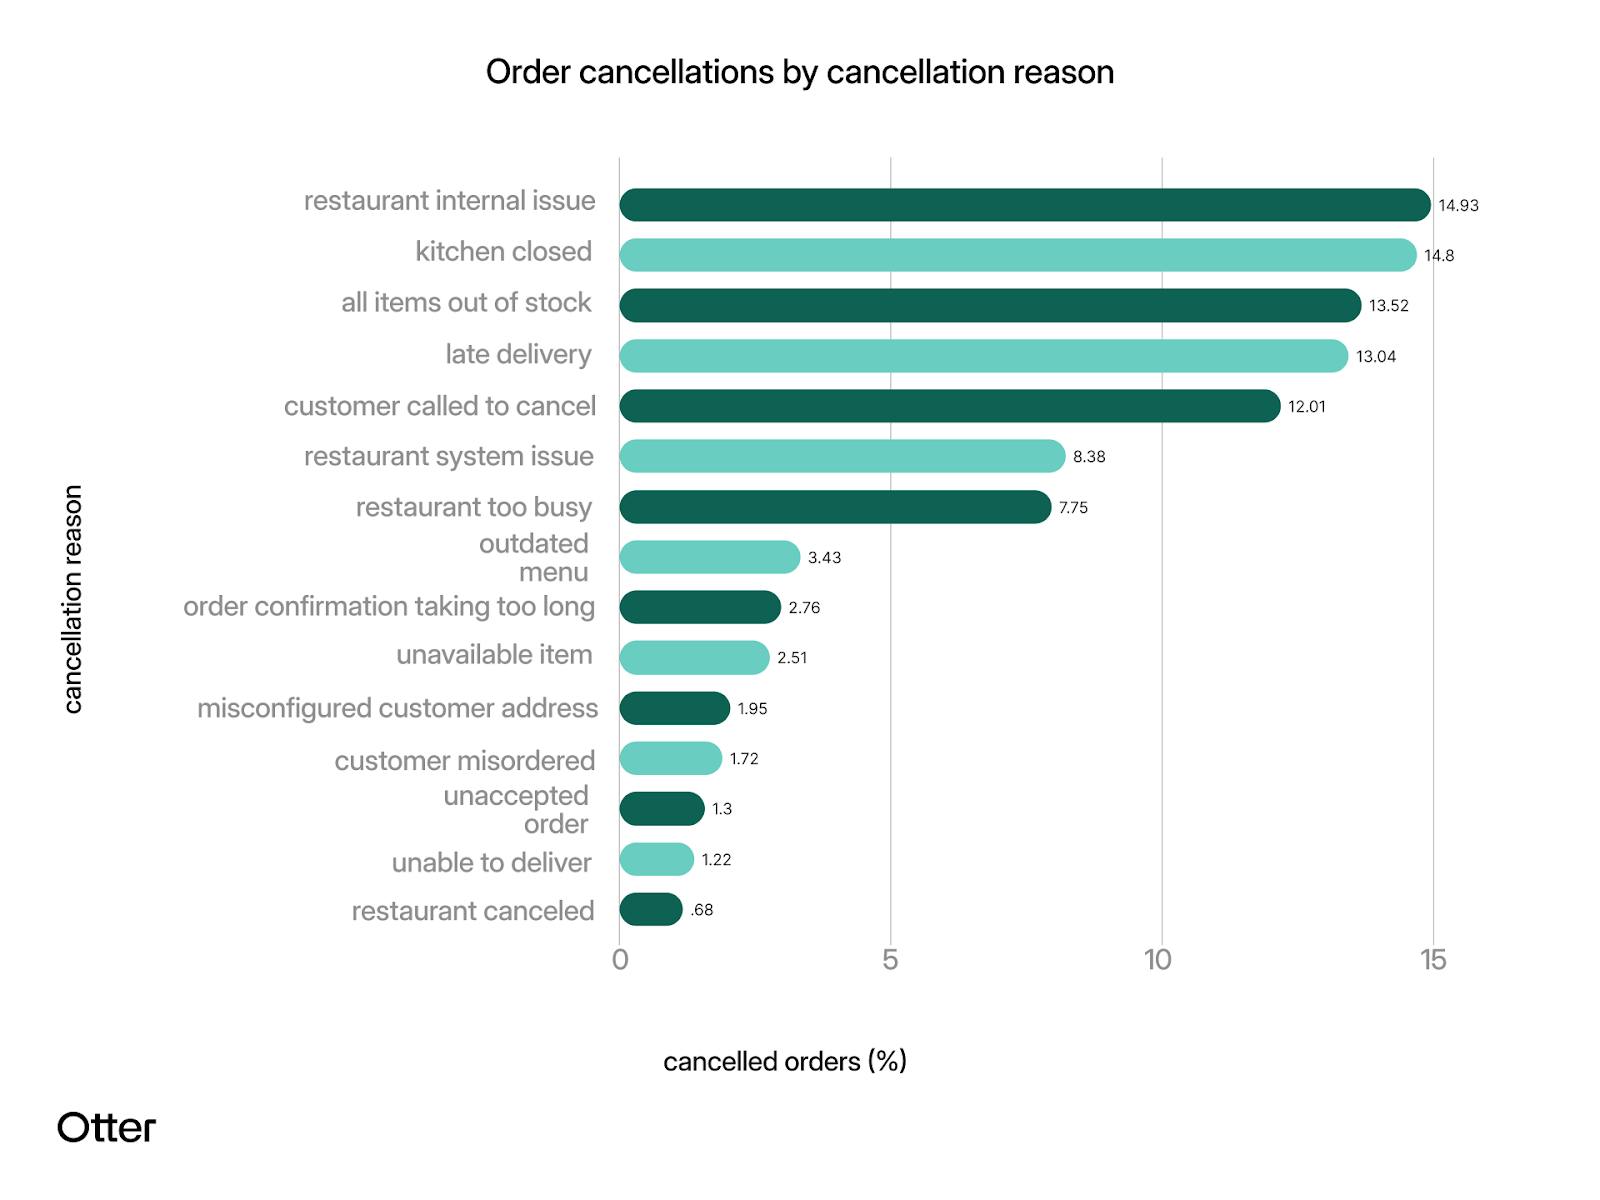 A chart showing restaurant order cancellations by cancellation reason. 